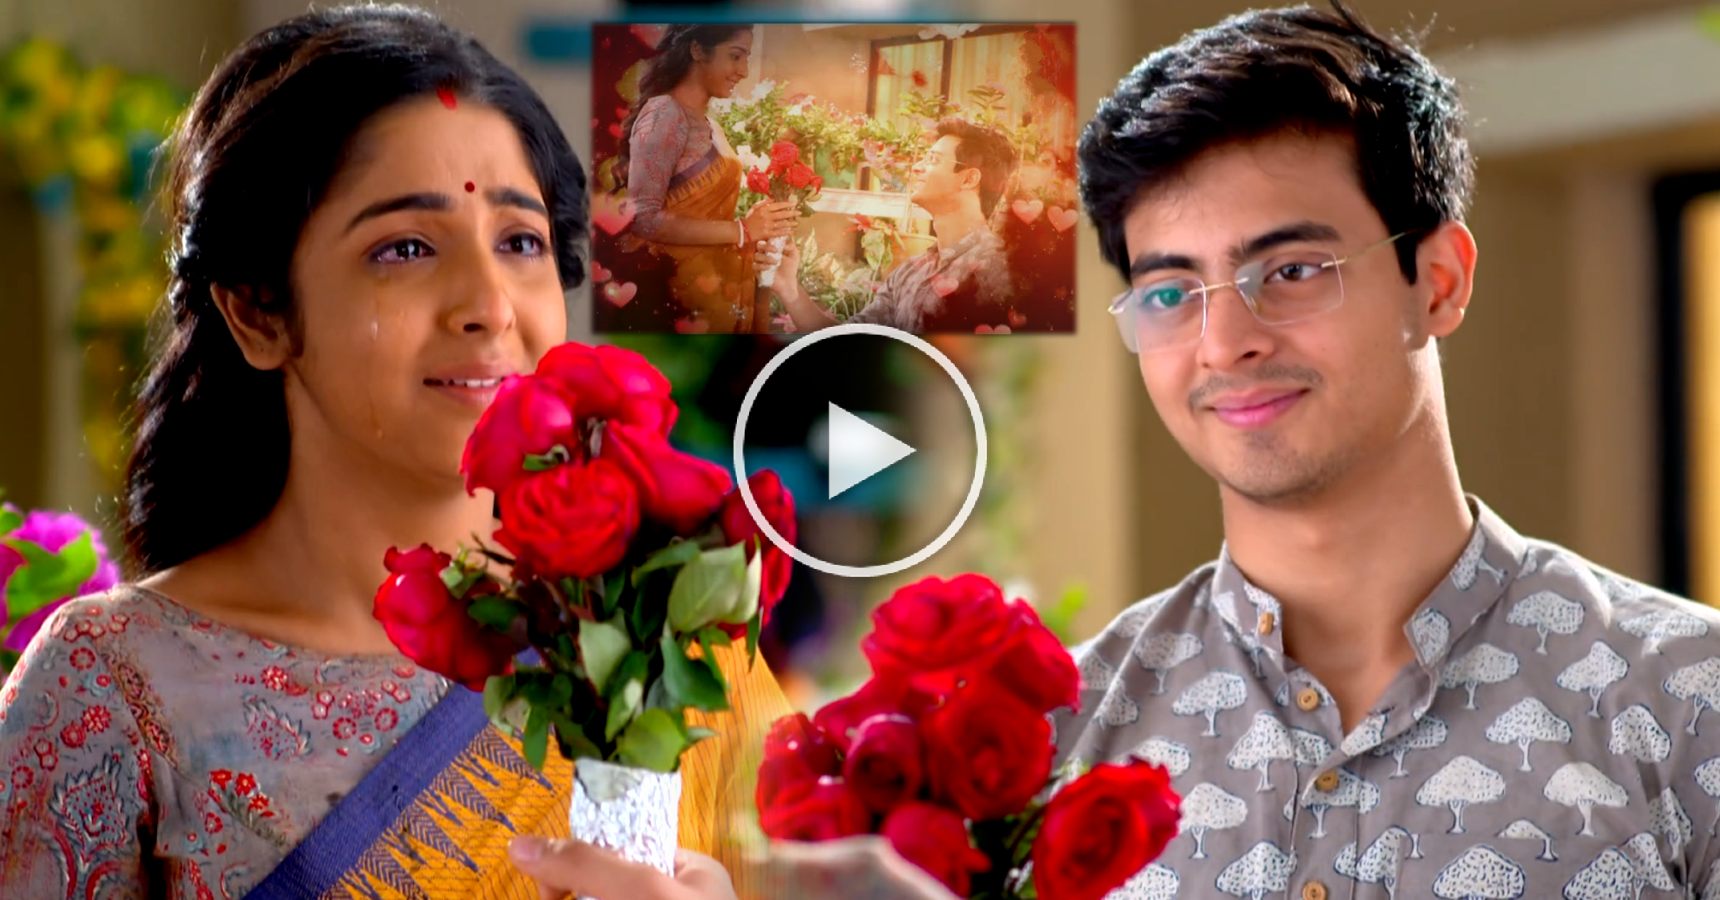 Anurager Chowa new Valentine's Day Special Promo Surjo comes to deepa with rose